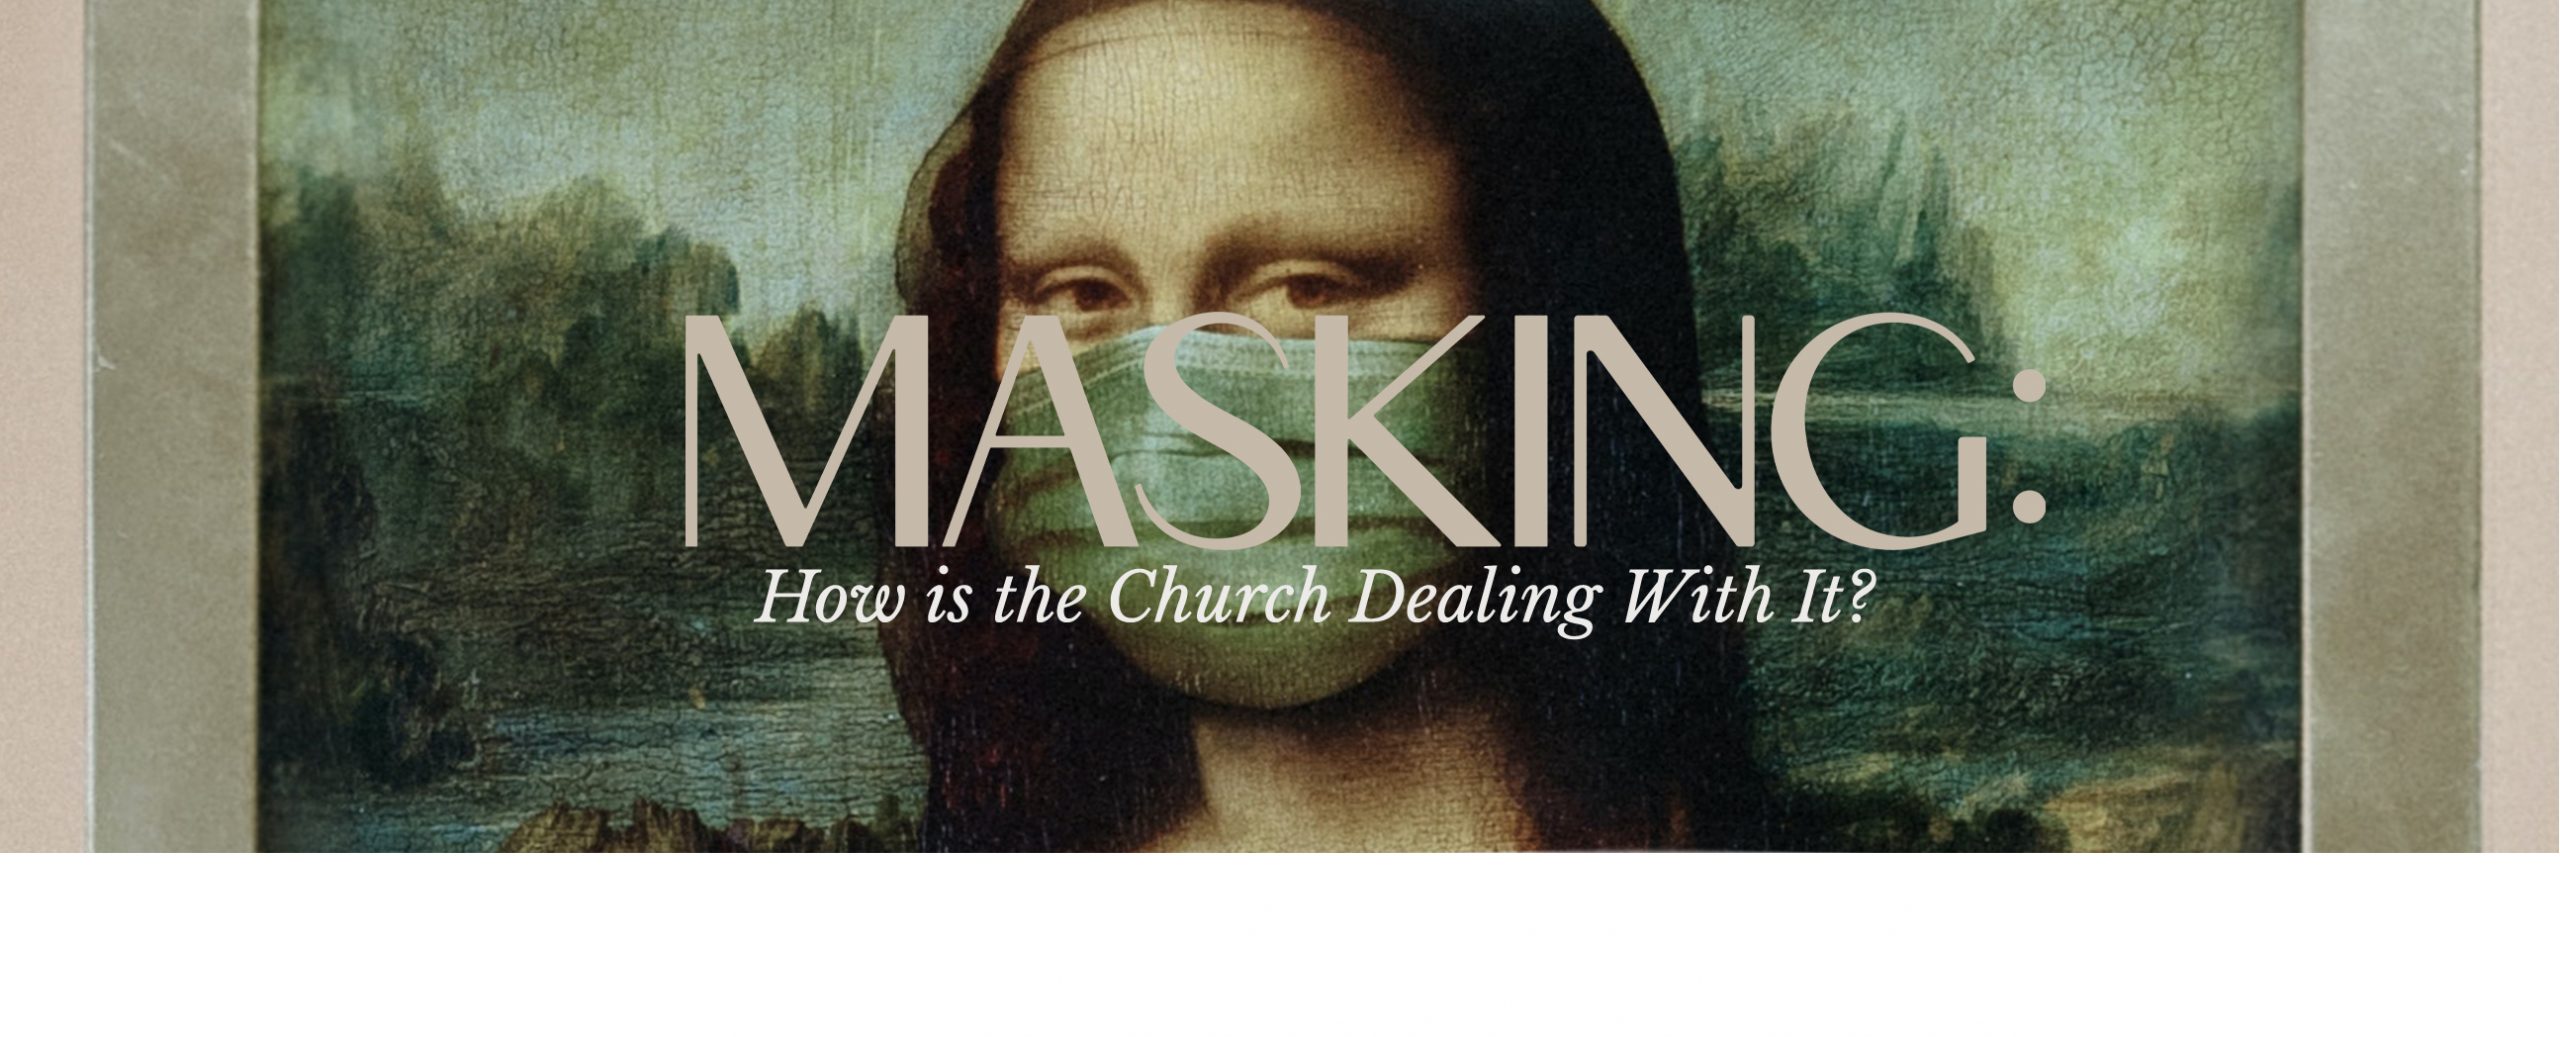 Masking: How is The Church Dealing With It?